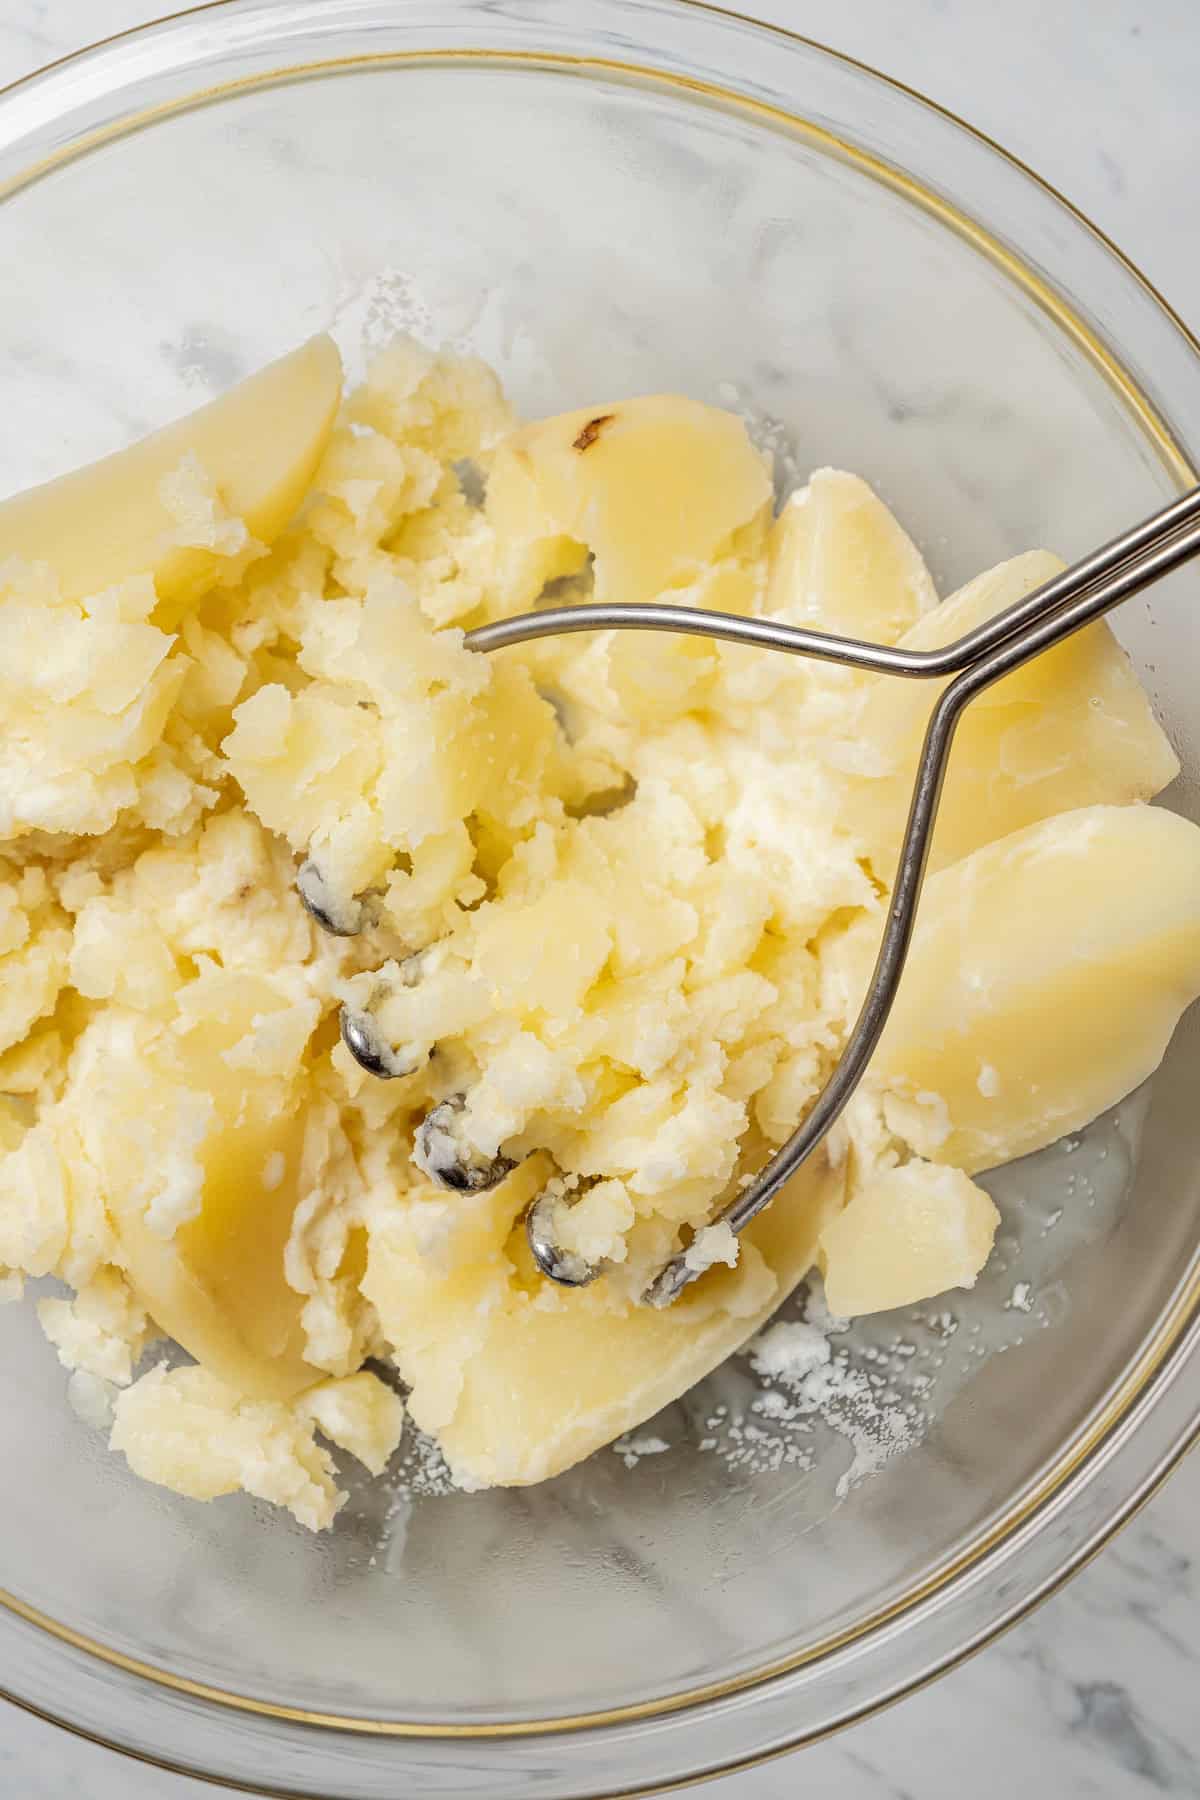 A potato masher resting in a glass bowl of partially mashed potatoes.